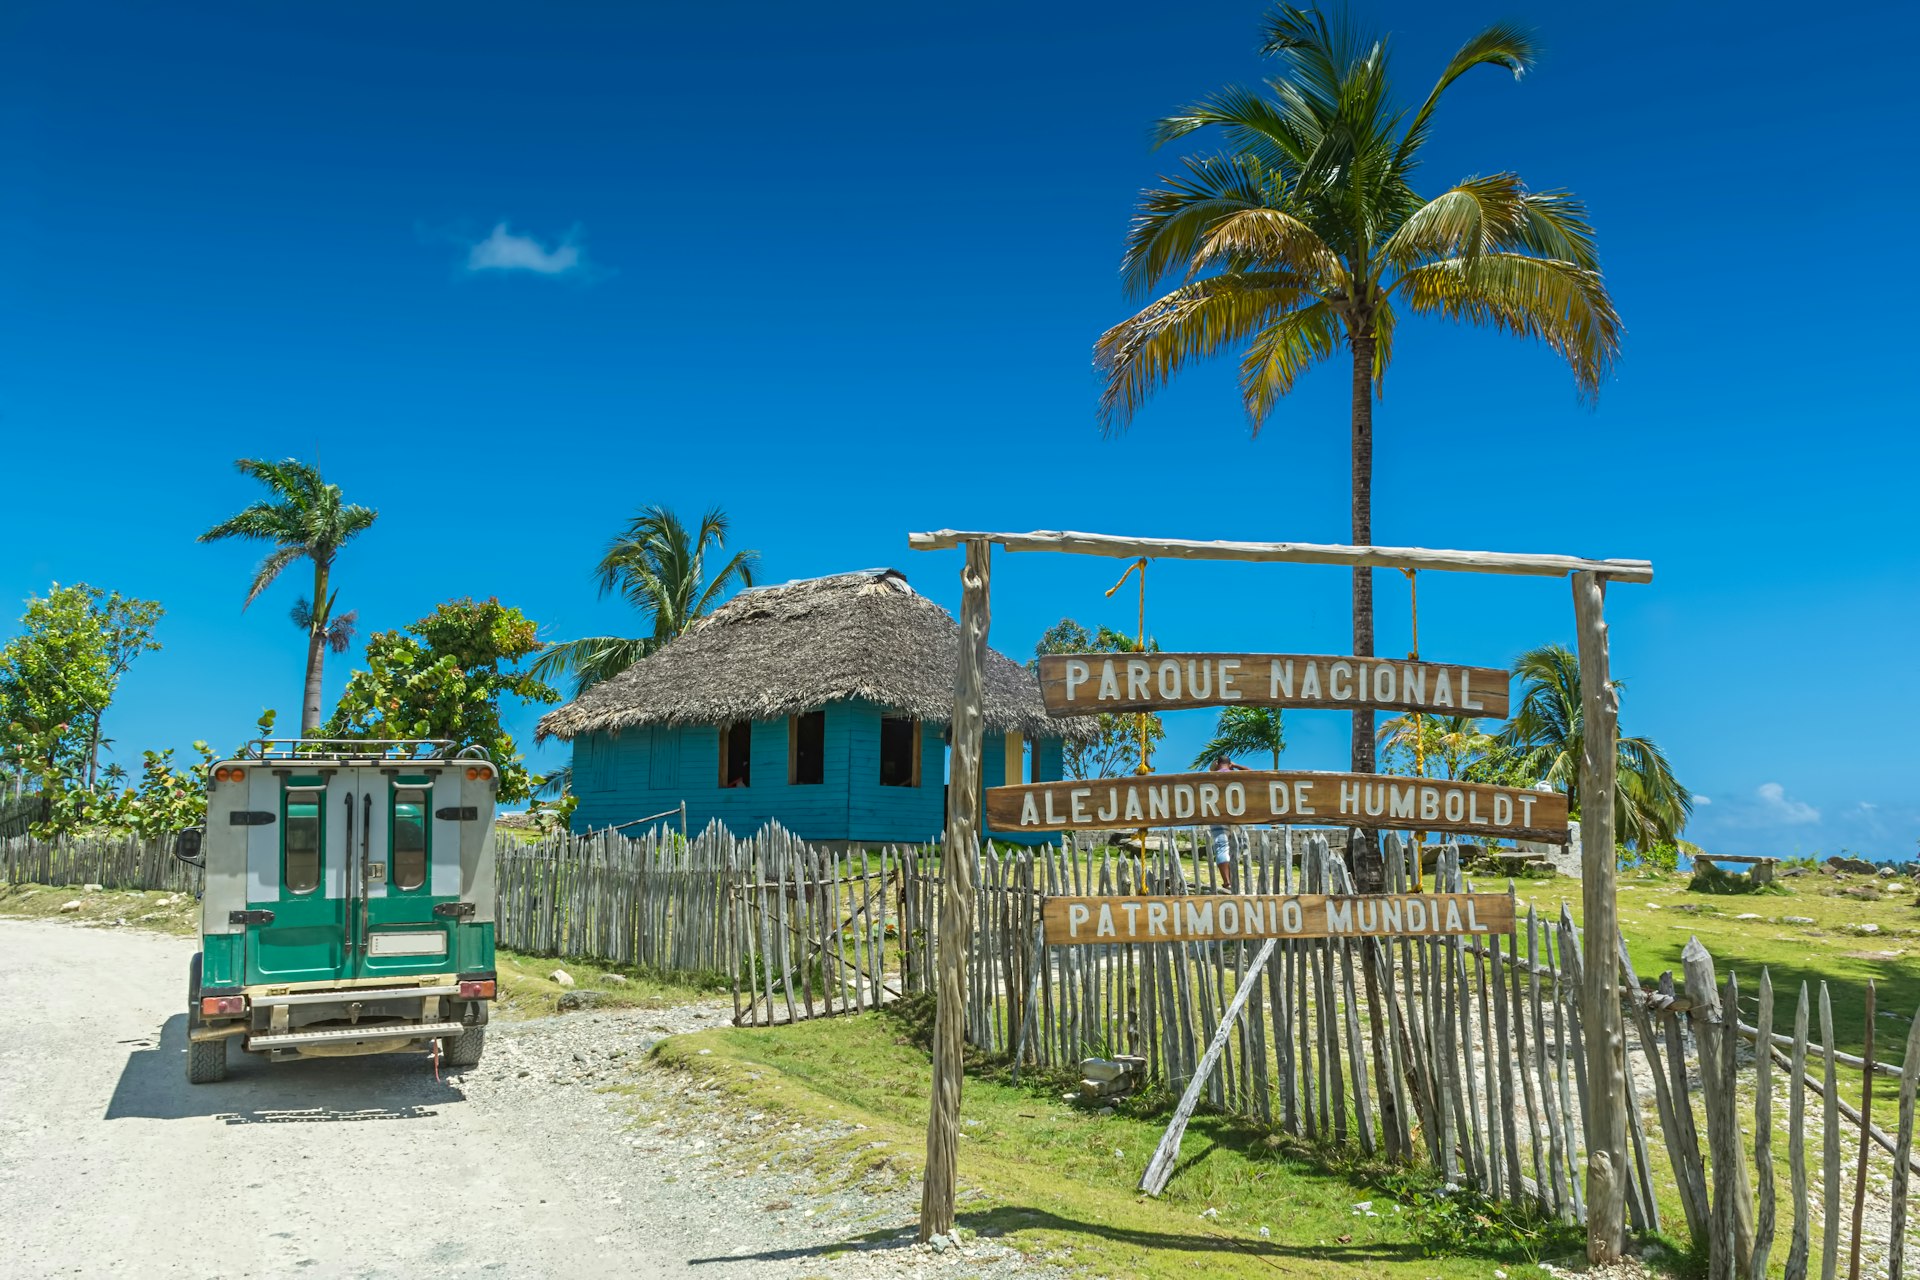 A sign at the entrance to Sign at Alejandro de Humboldt National Park in Cuba, with picket fence, thatched-roof visitor center, palm trees and blue skies